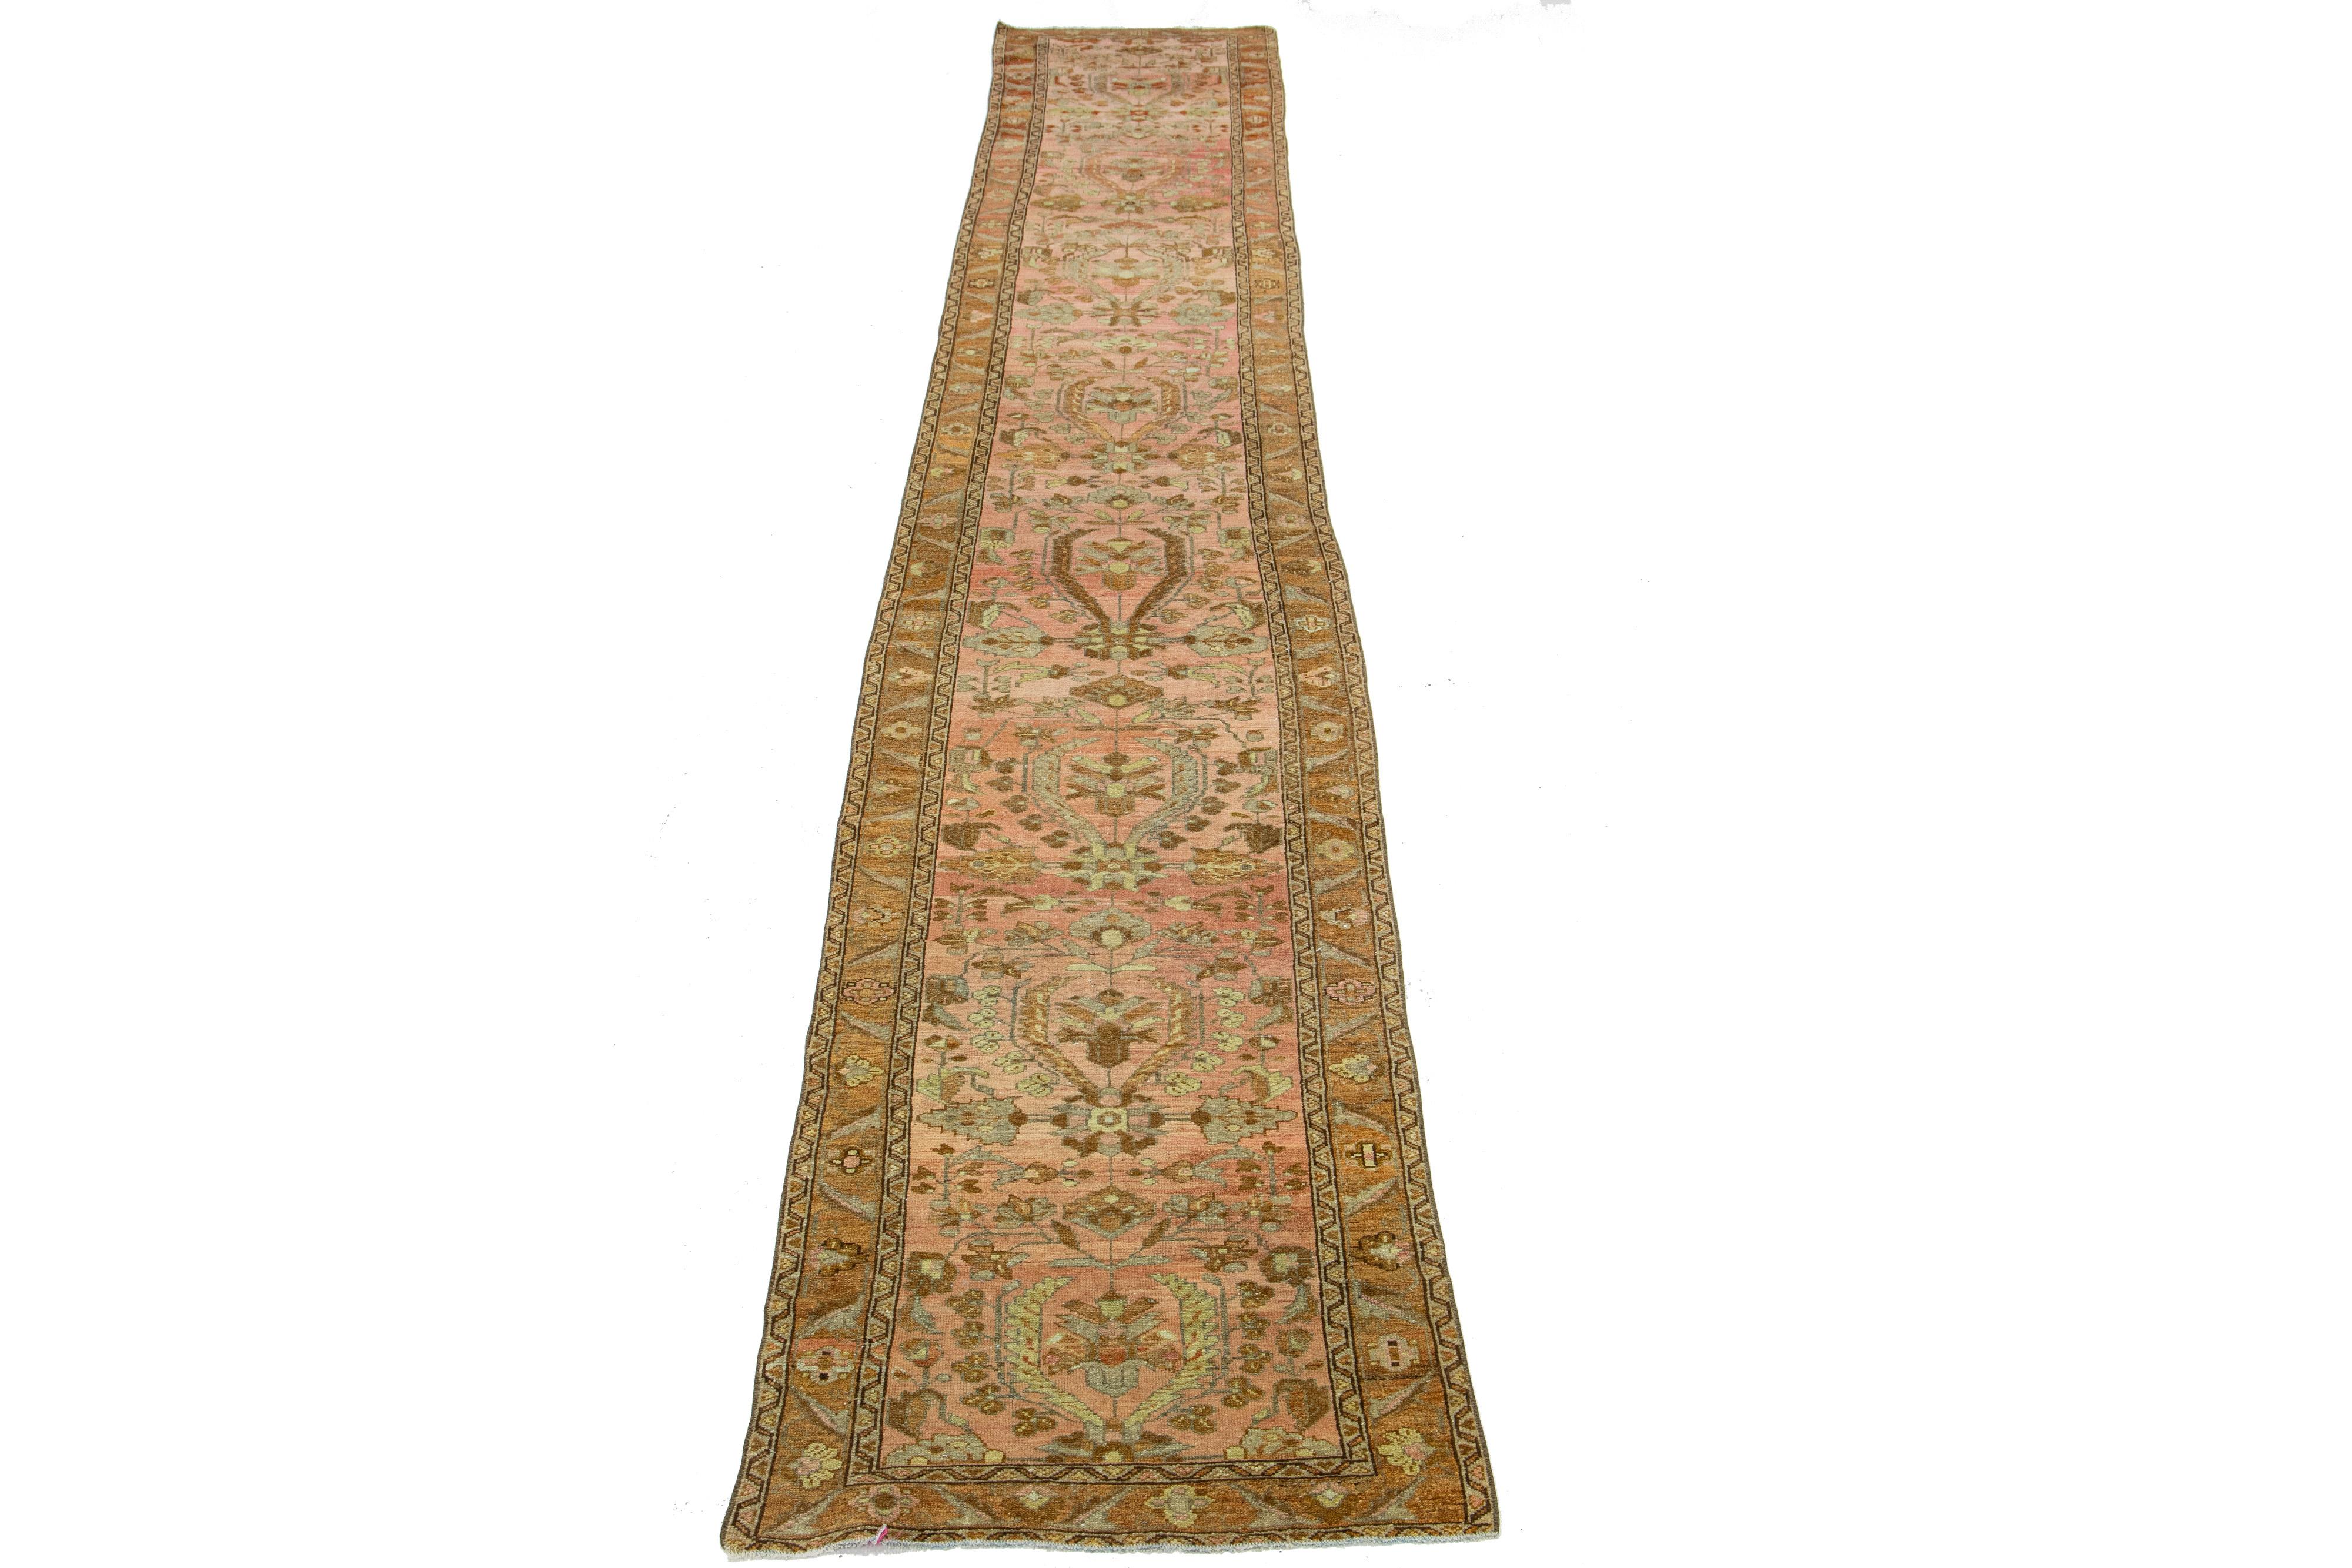 Beautiful antique Lilihan hand-knotted wool with a peach field. This Persian has blue borders with an all-over floral pattern design in brown and beige accents. 

This rug measures 2'7